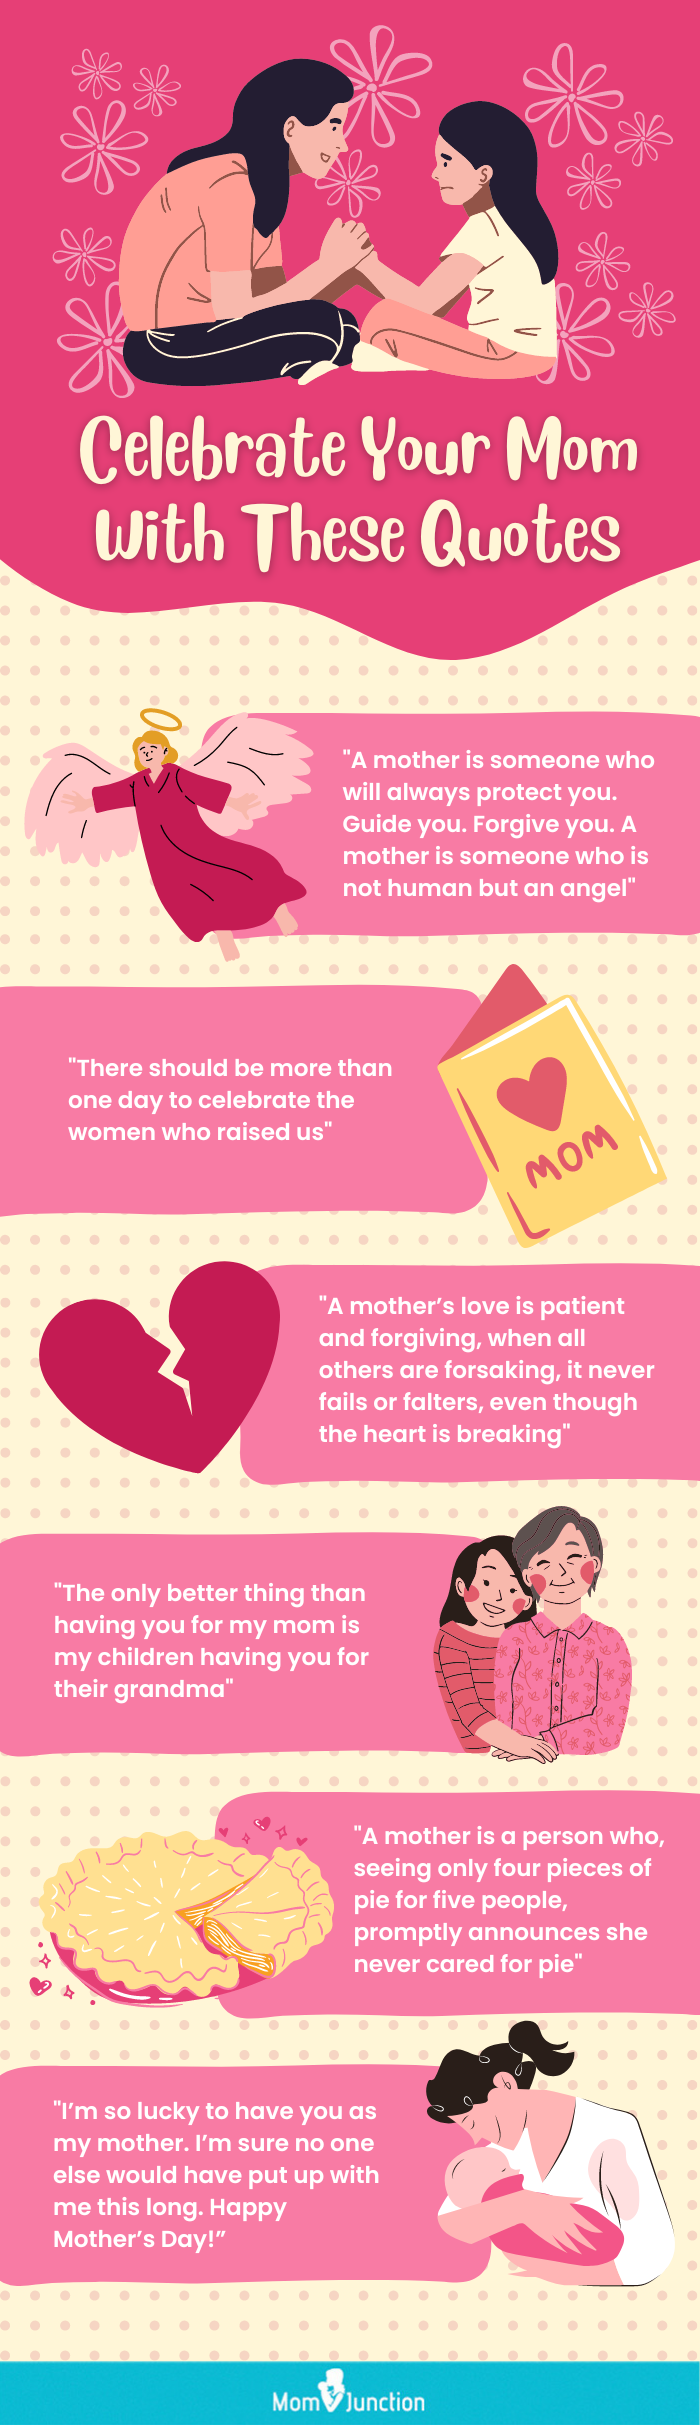 beautiful quotes for mothers day (infographic)